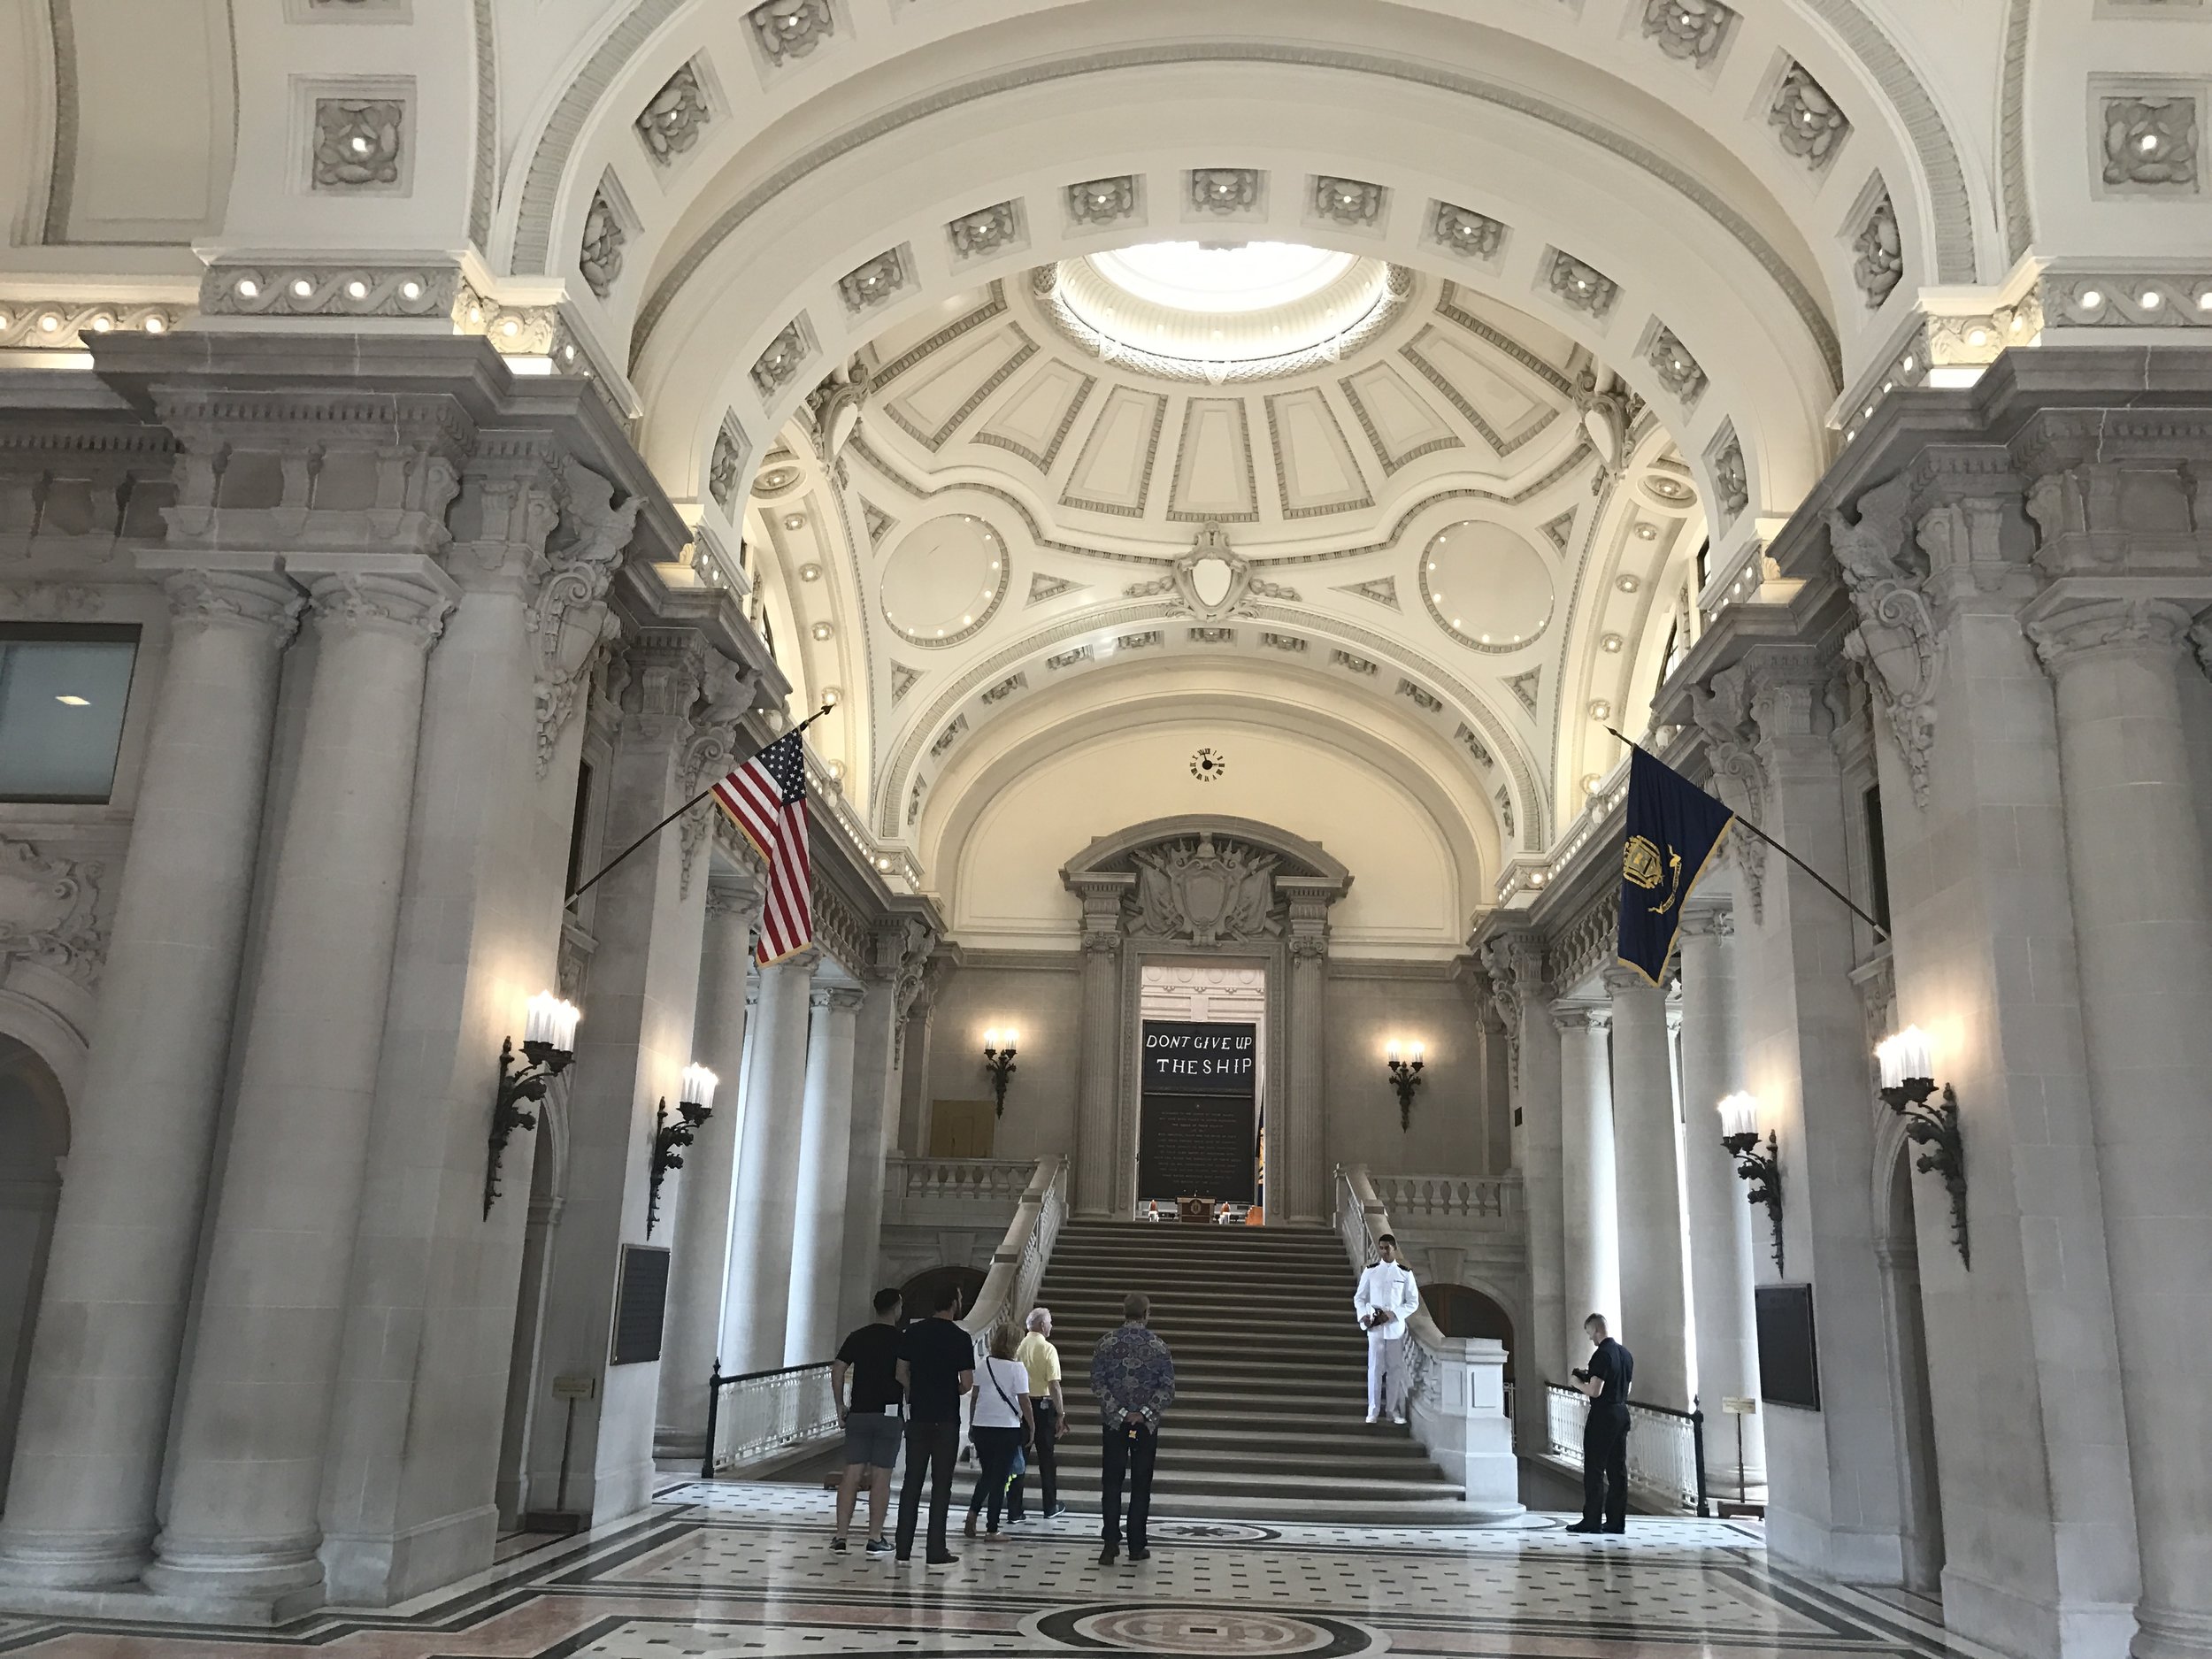 Hall at the Main Dormer of the United States Naval Academy